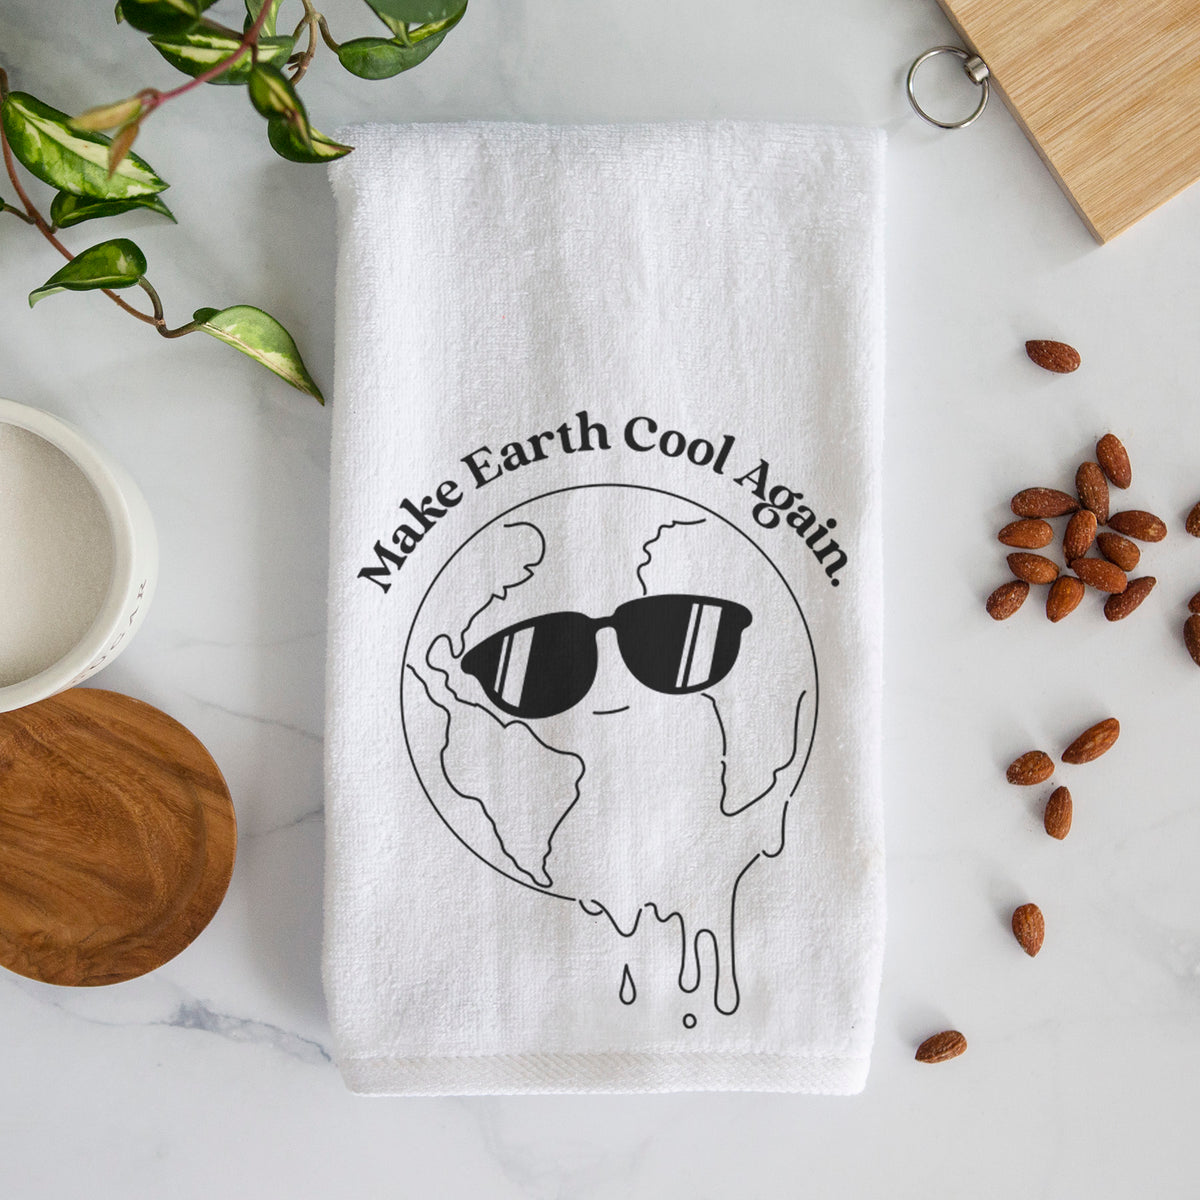 Make Earth Cool Again - Melted Planet Hand Towel